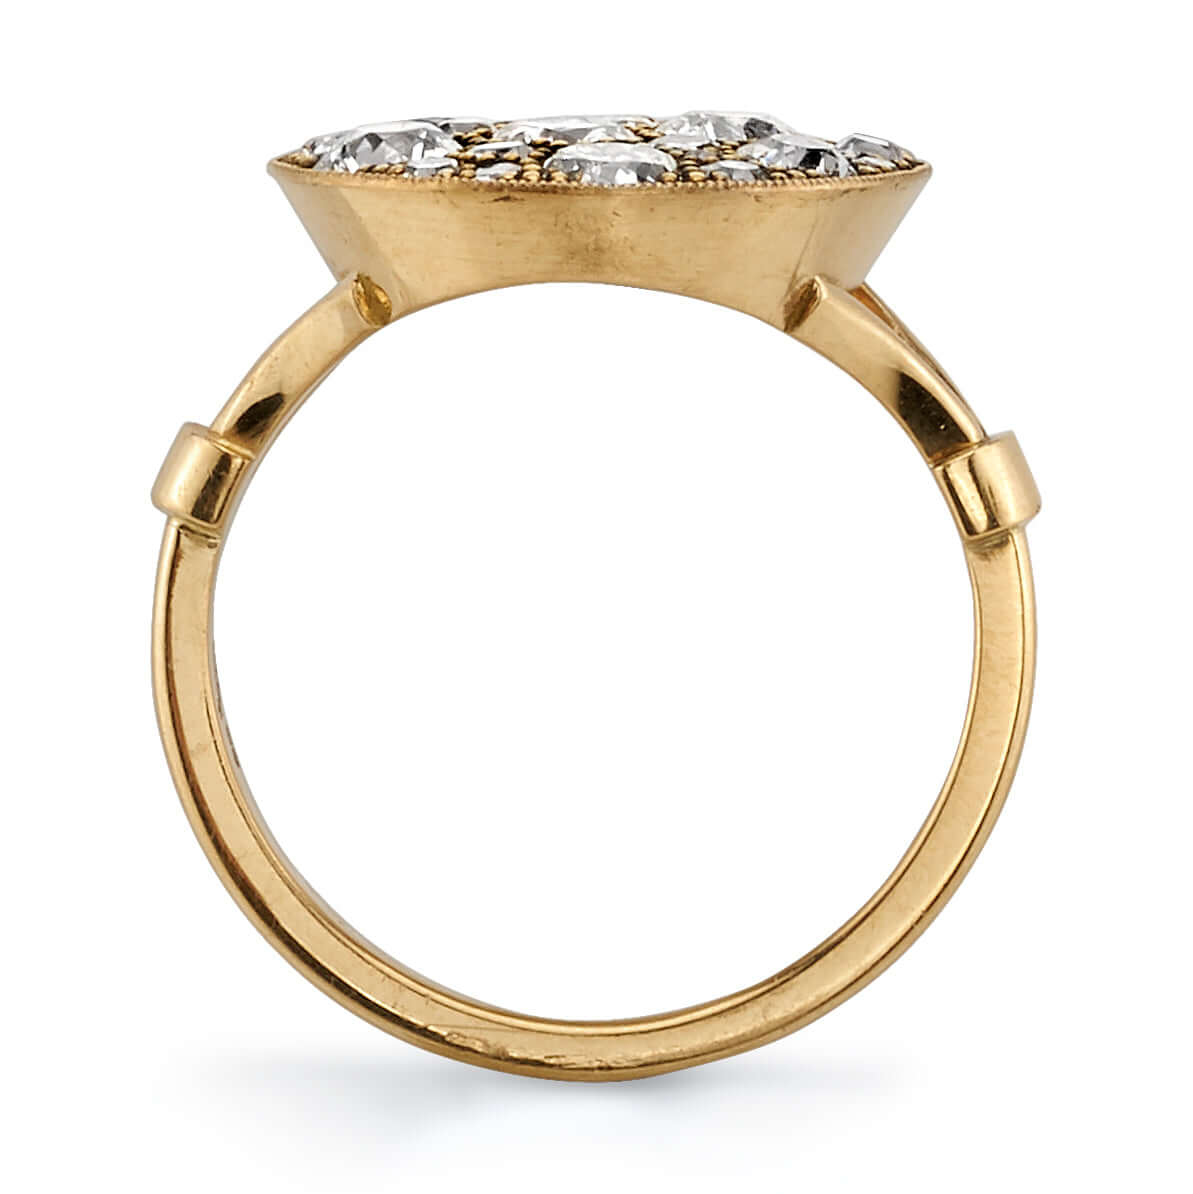 SINGLE STONE COBBLESTONE CRUX RING featuring 2.42ctw varying old cut and round brilliant cut diamonds set in a handcrafted, oxidized 18K yellow gold mounting. Price may vary according to total diamond weight. *Cobblestone pattern may vary from piece to pi